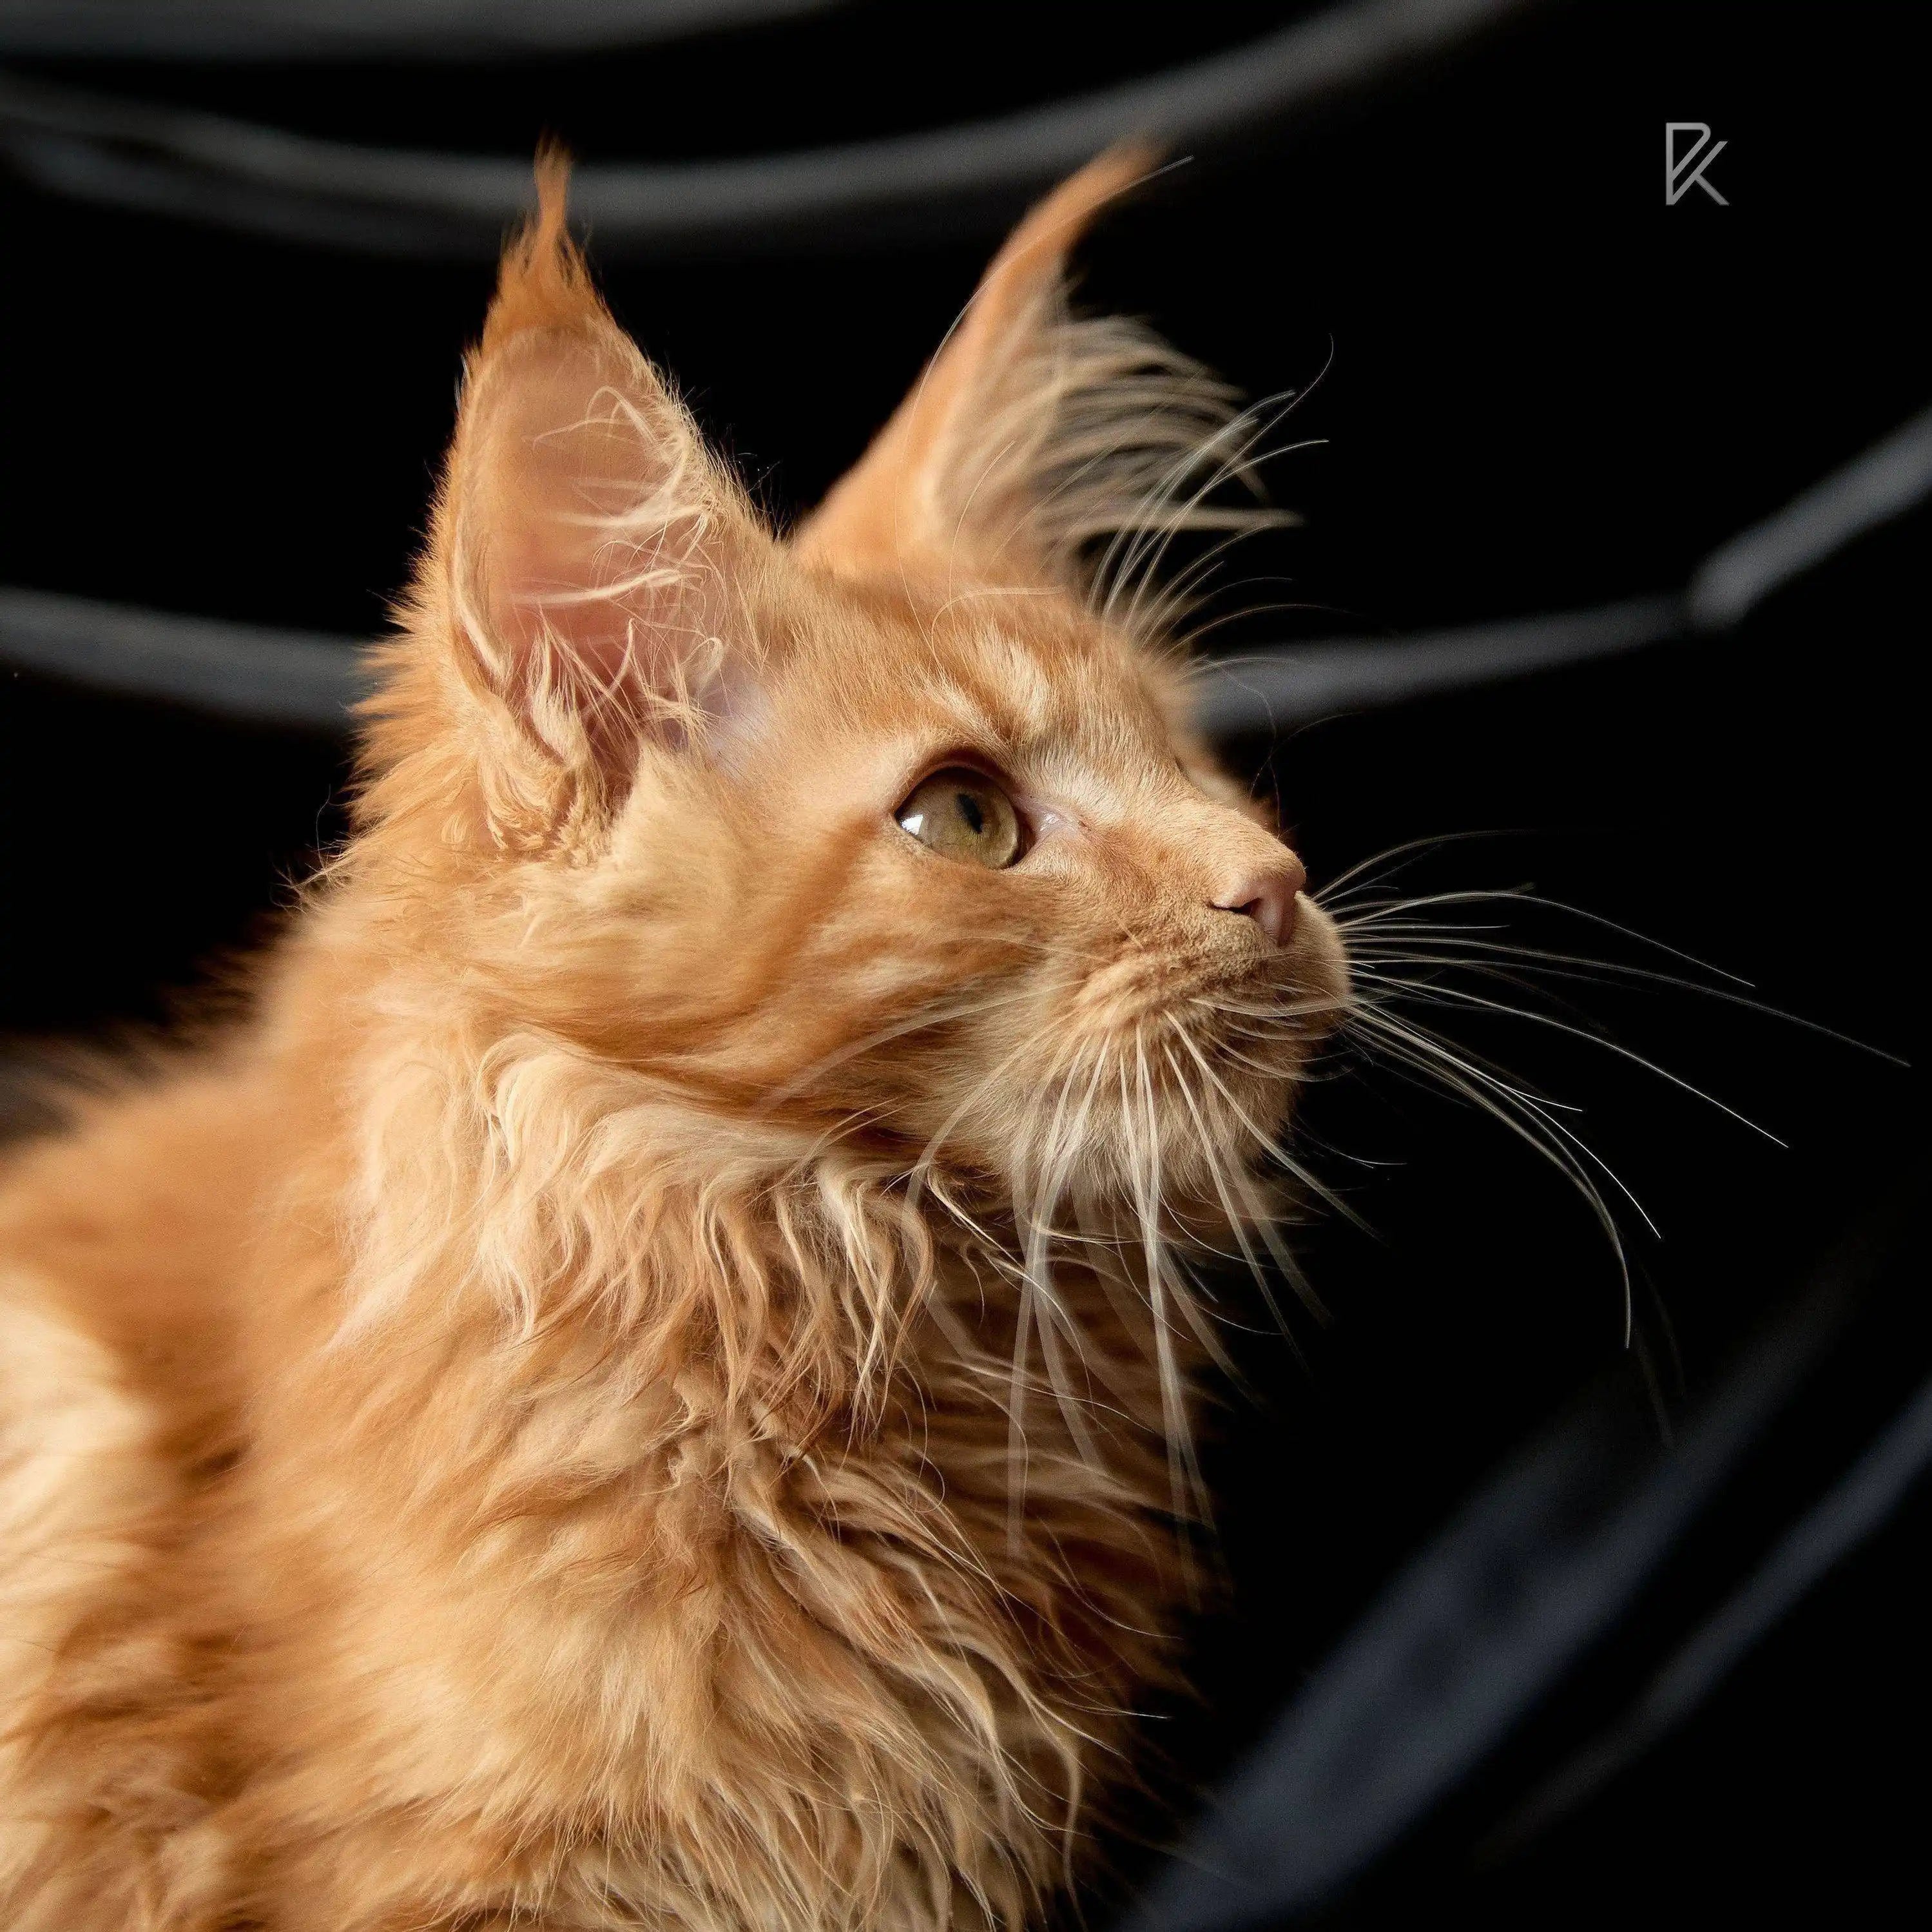 Maine Coon Kittens for Sale Unique | Kitten